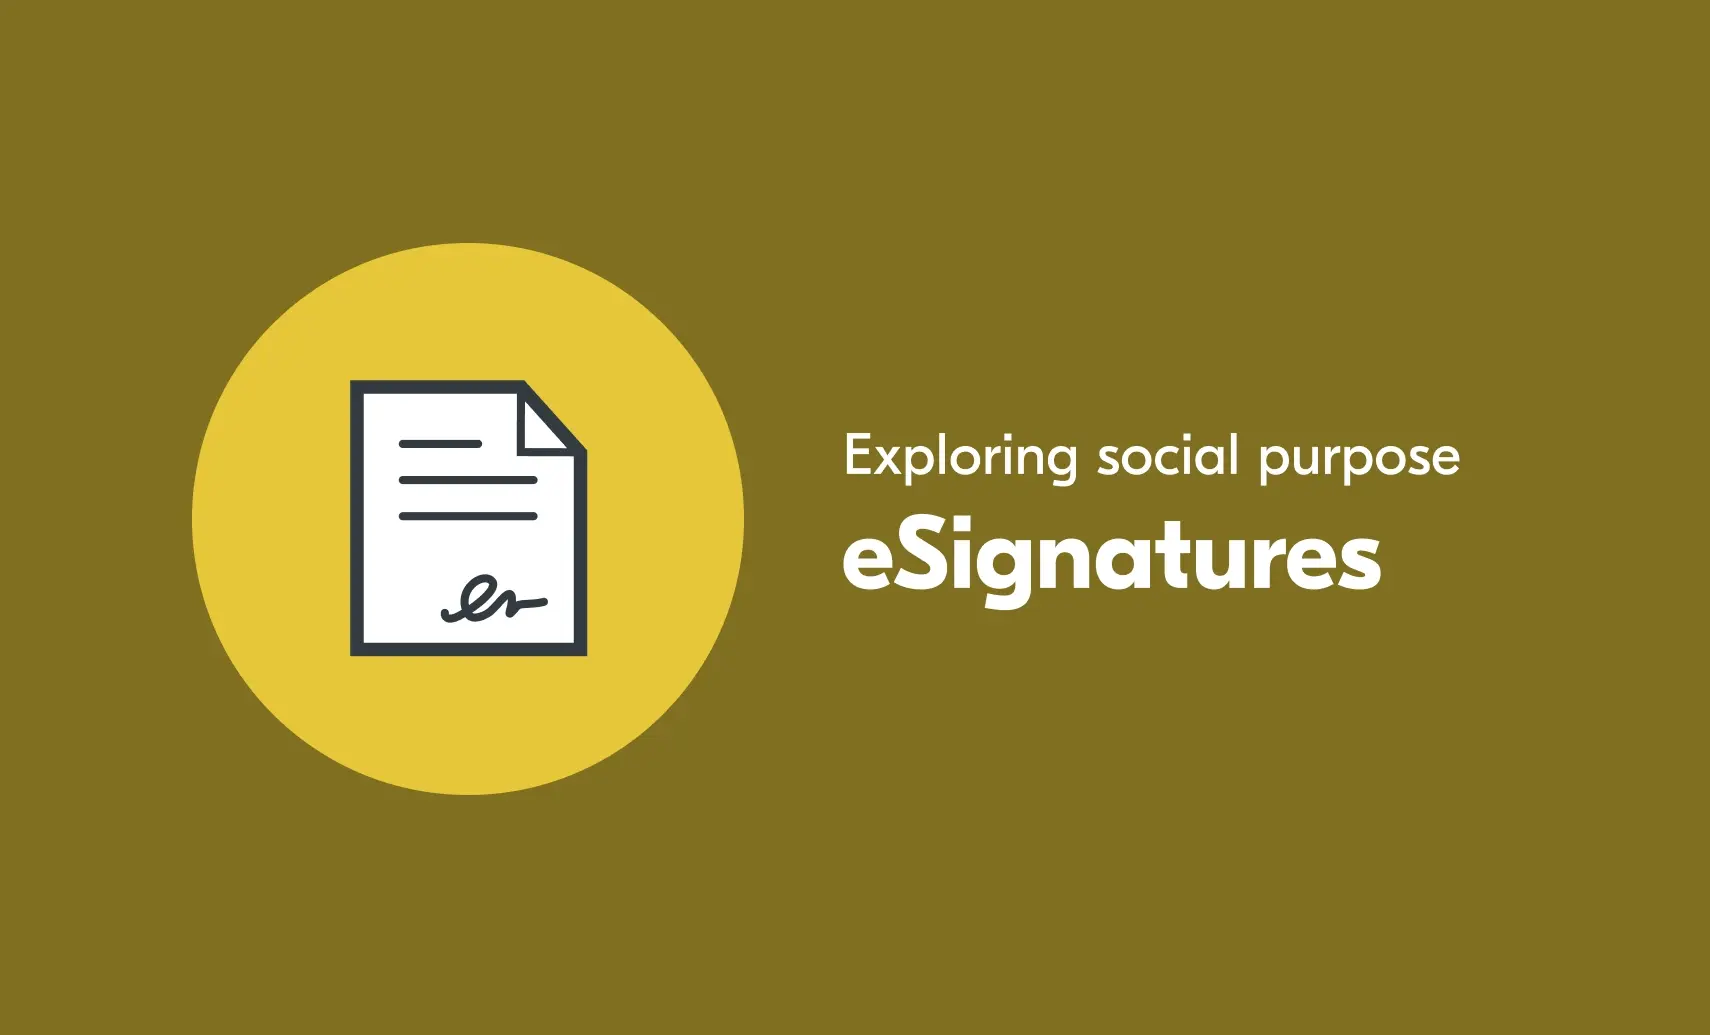 An illustration of a signed document. The accompanying text says "Exploring social purpose: eSignatures".